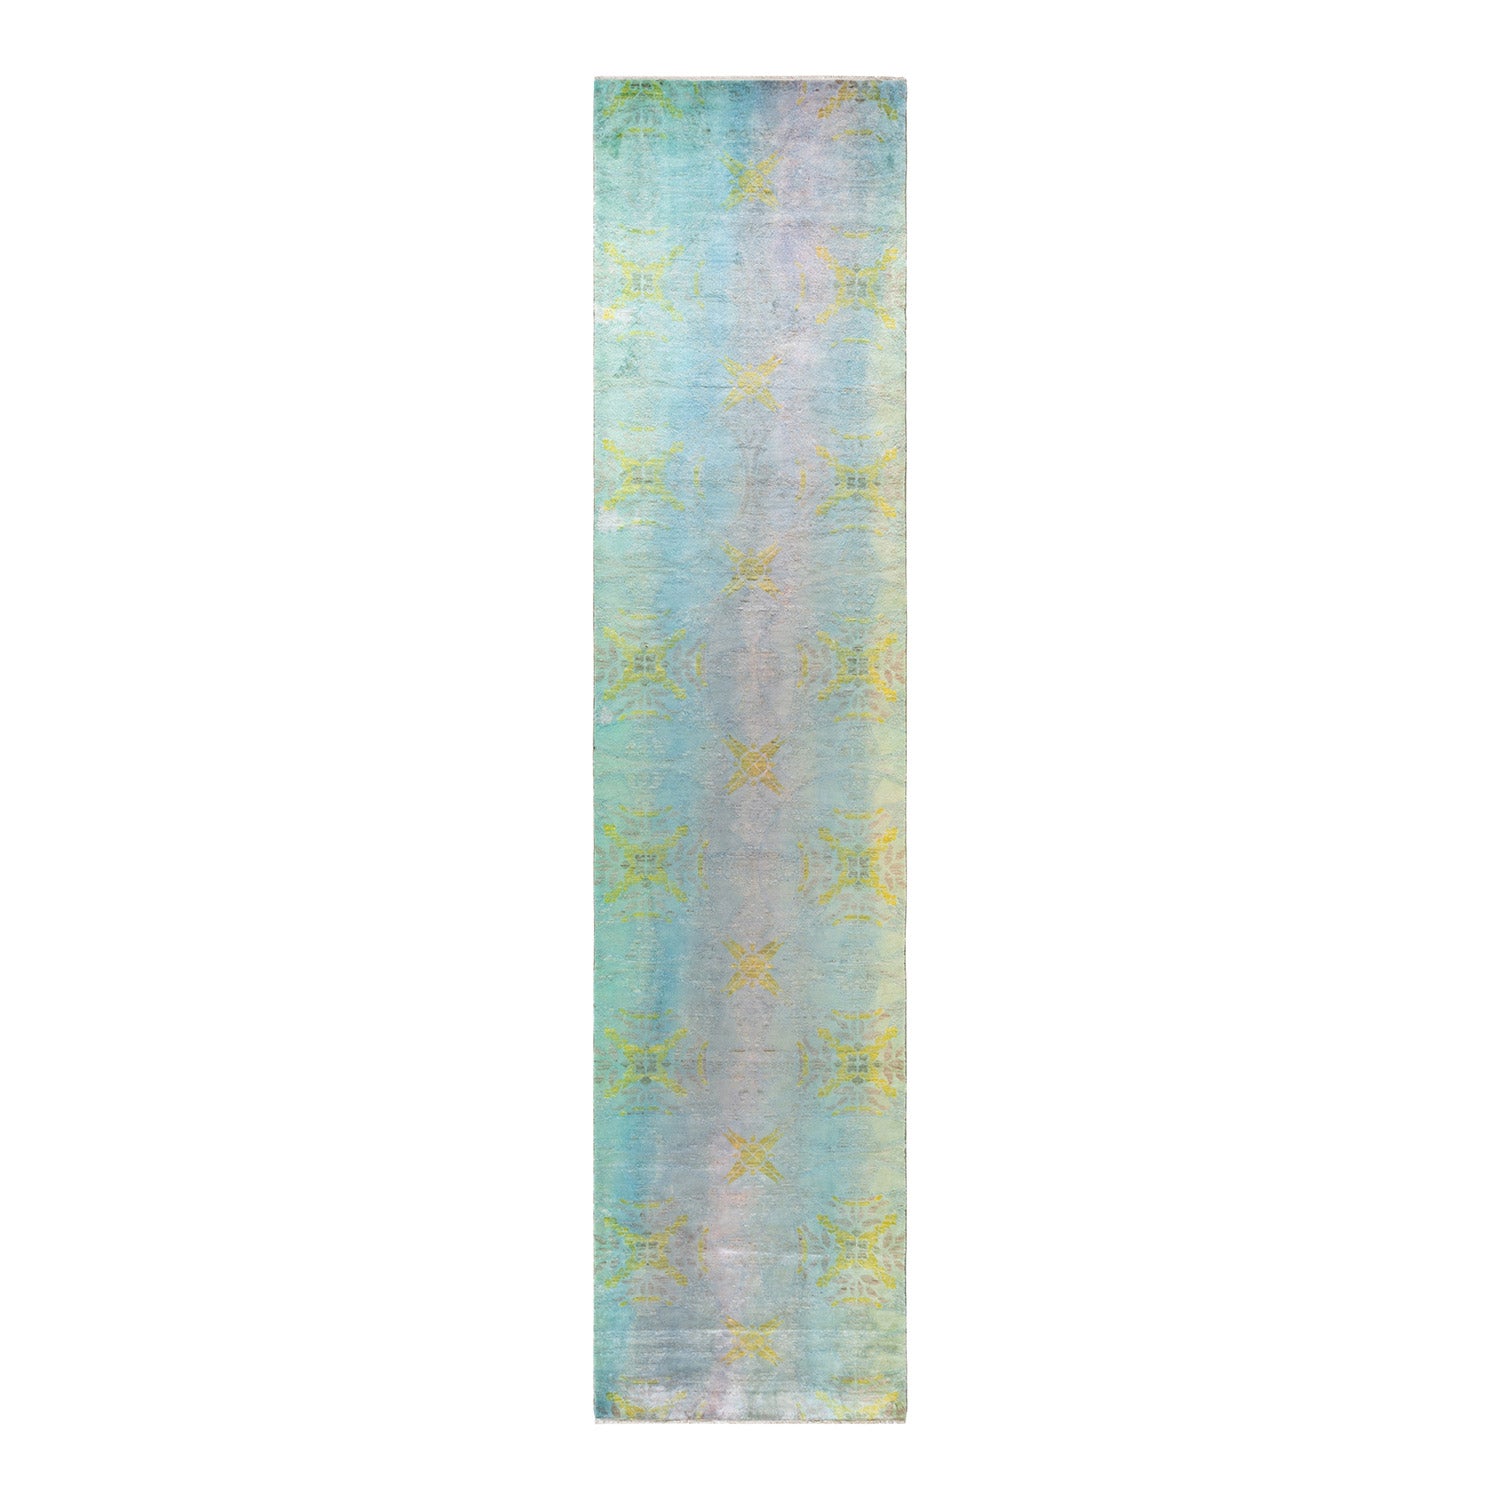 Pastel-hued textile with repetitive floral motifs creates a serene atmosphere.